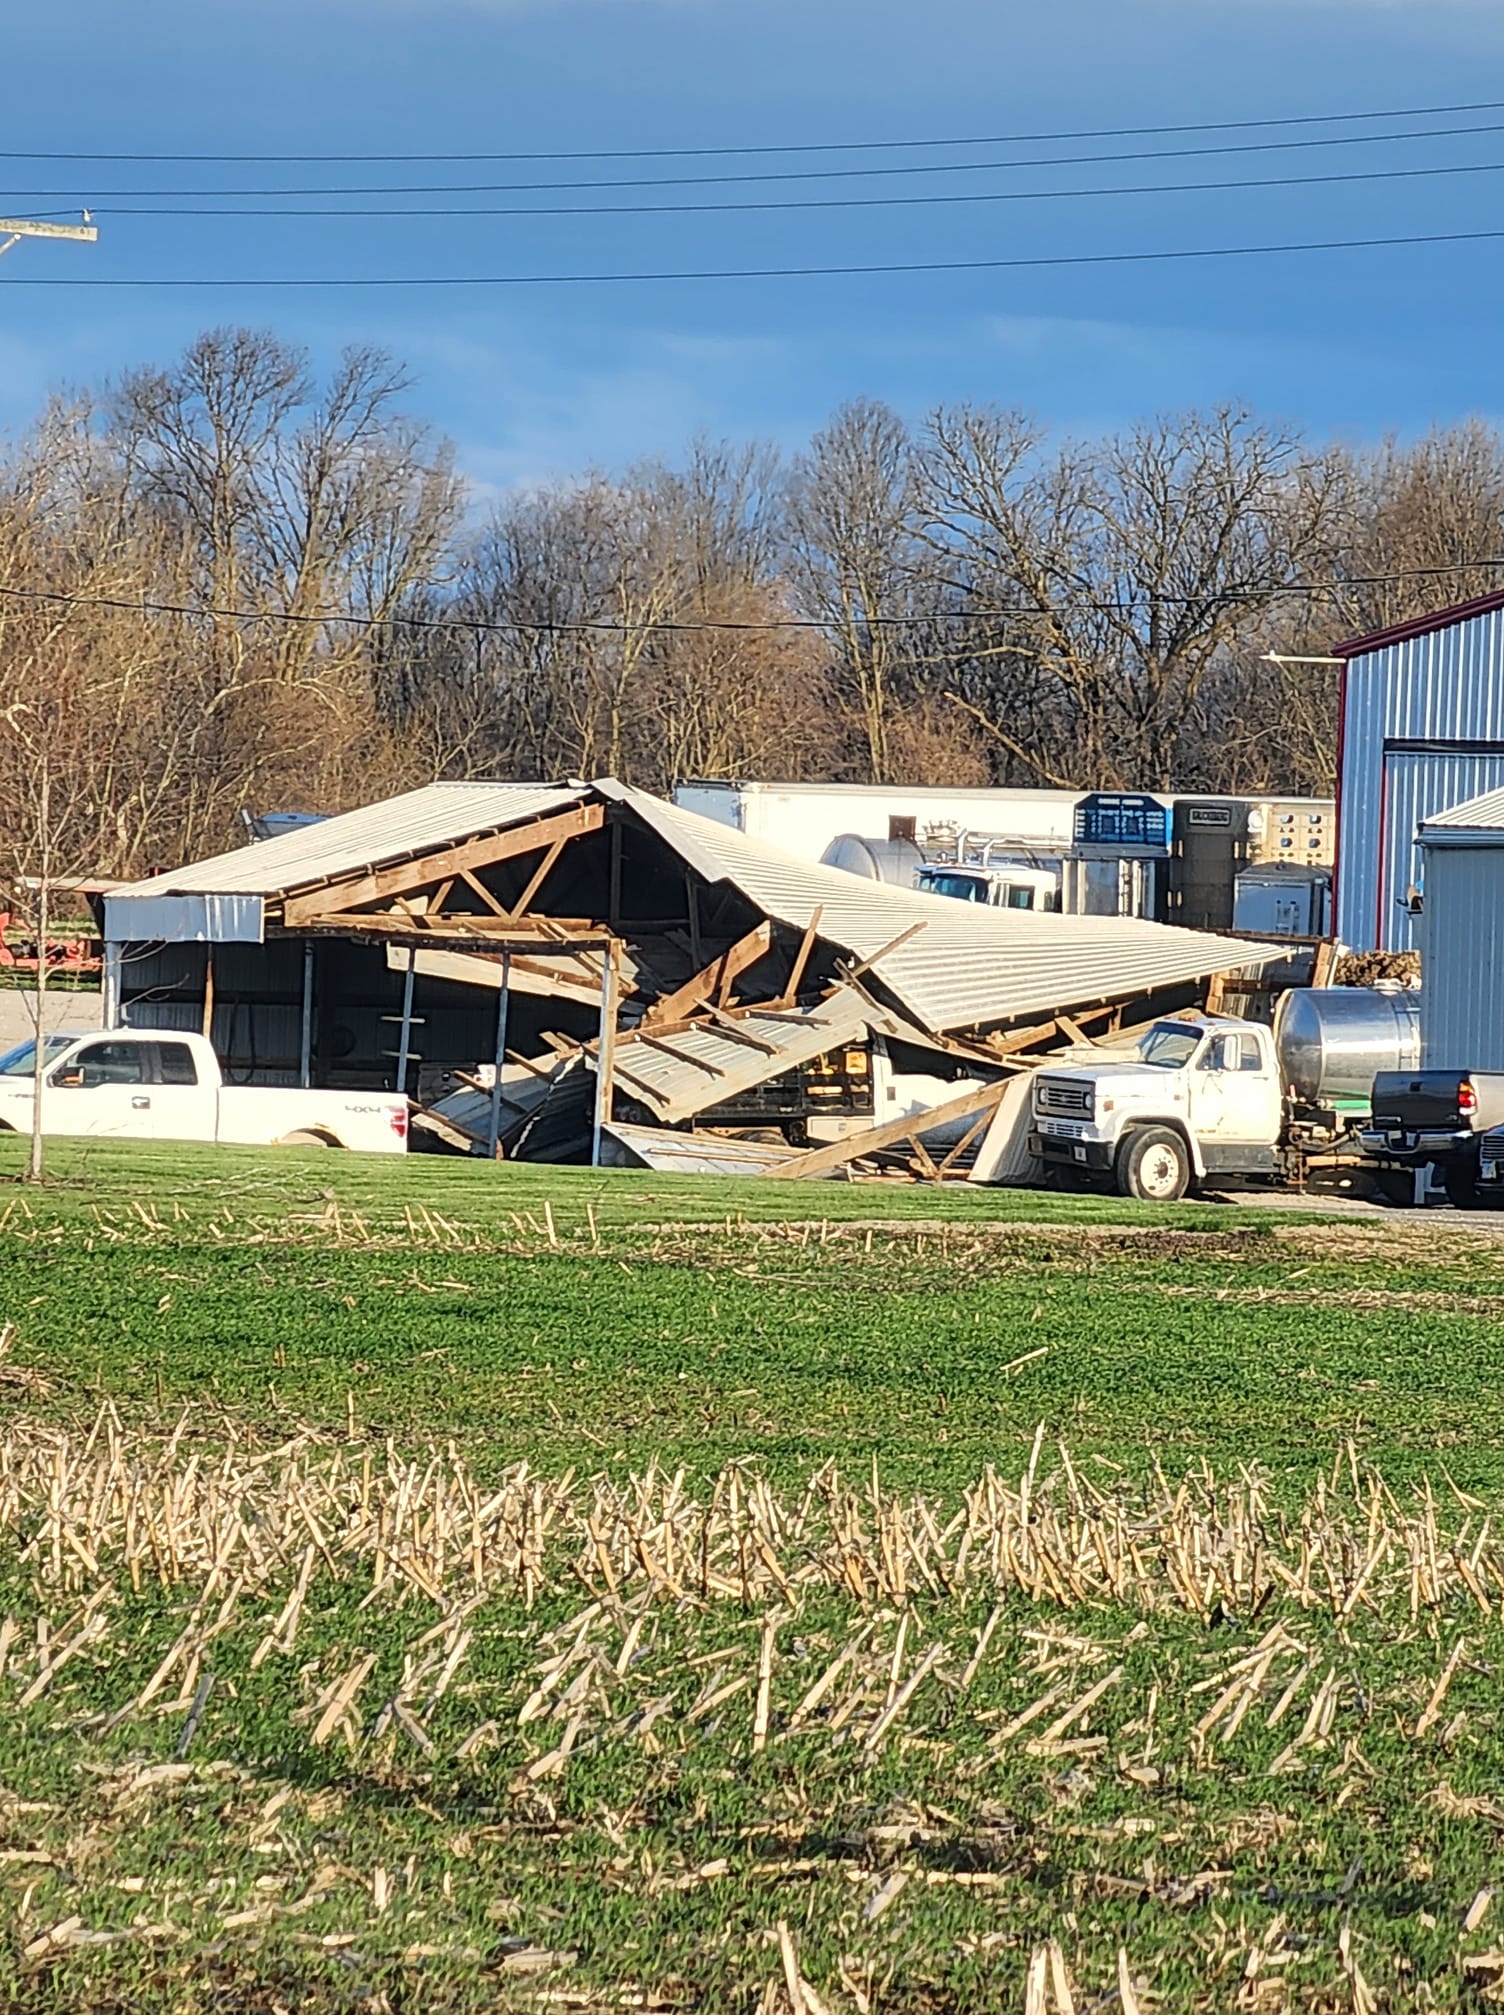 An outbuilding heavily damaged by straight-line winds on Fields Dr. in Moro, IL. (Tim Bertels)